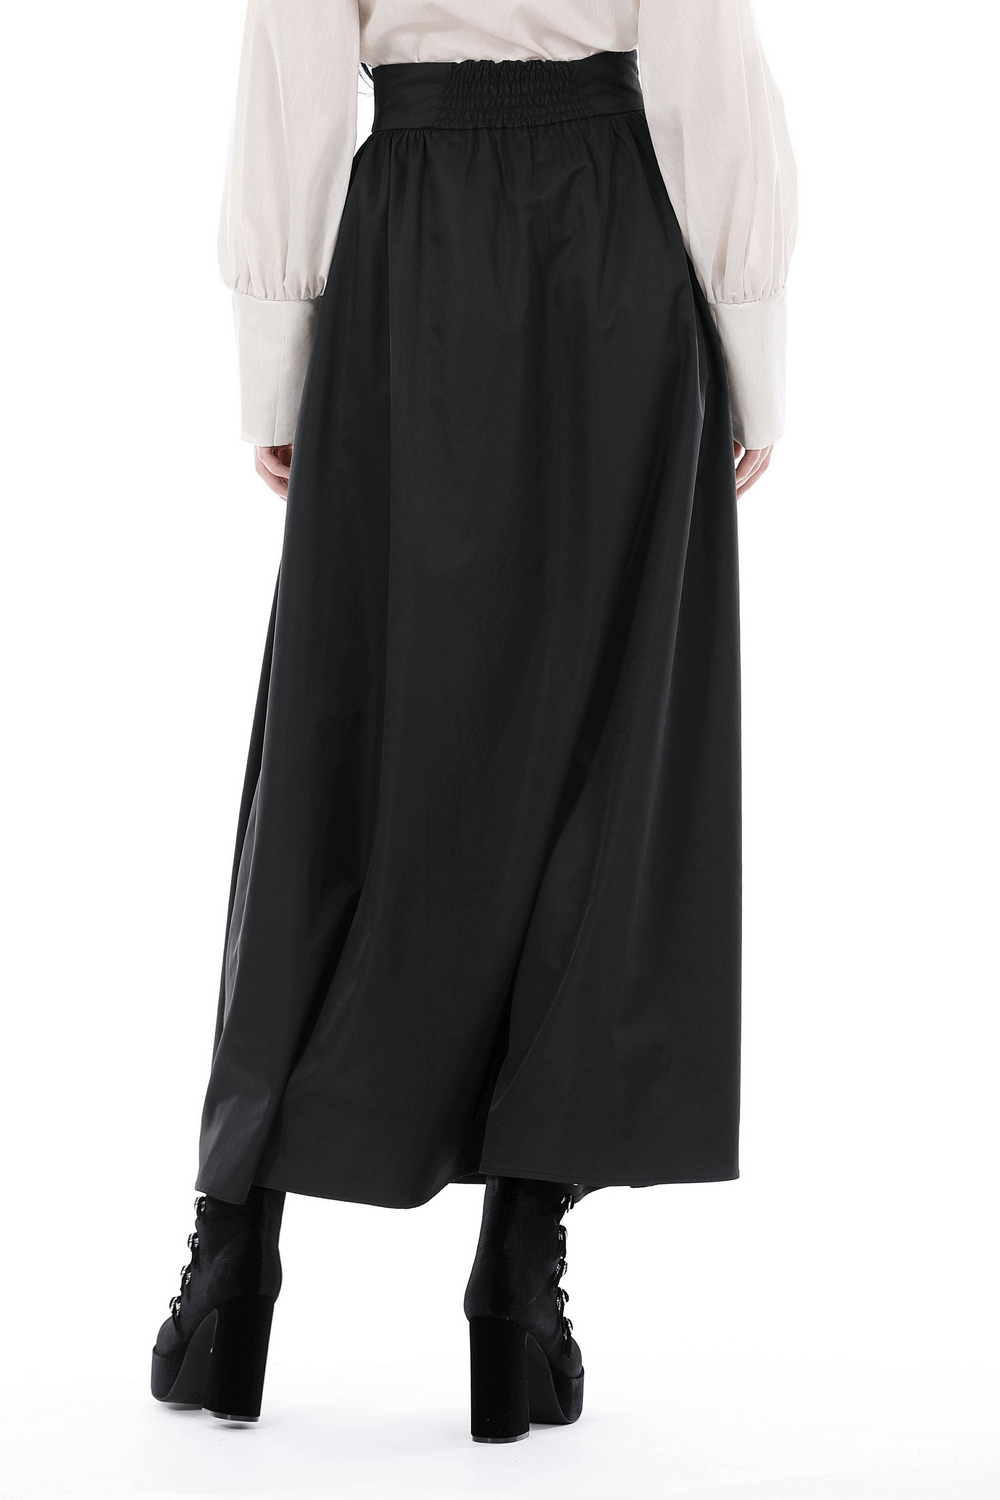 Elegant Gothic A-Line Long Skirt with Wide Corset Belt